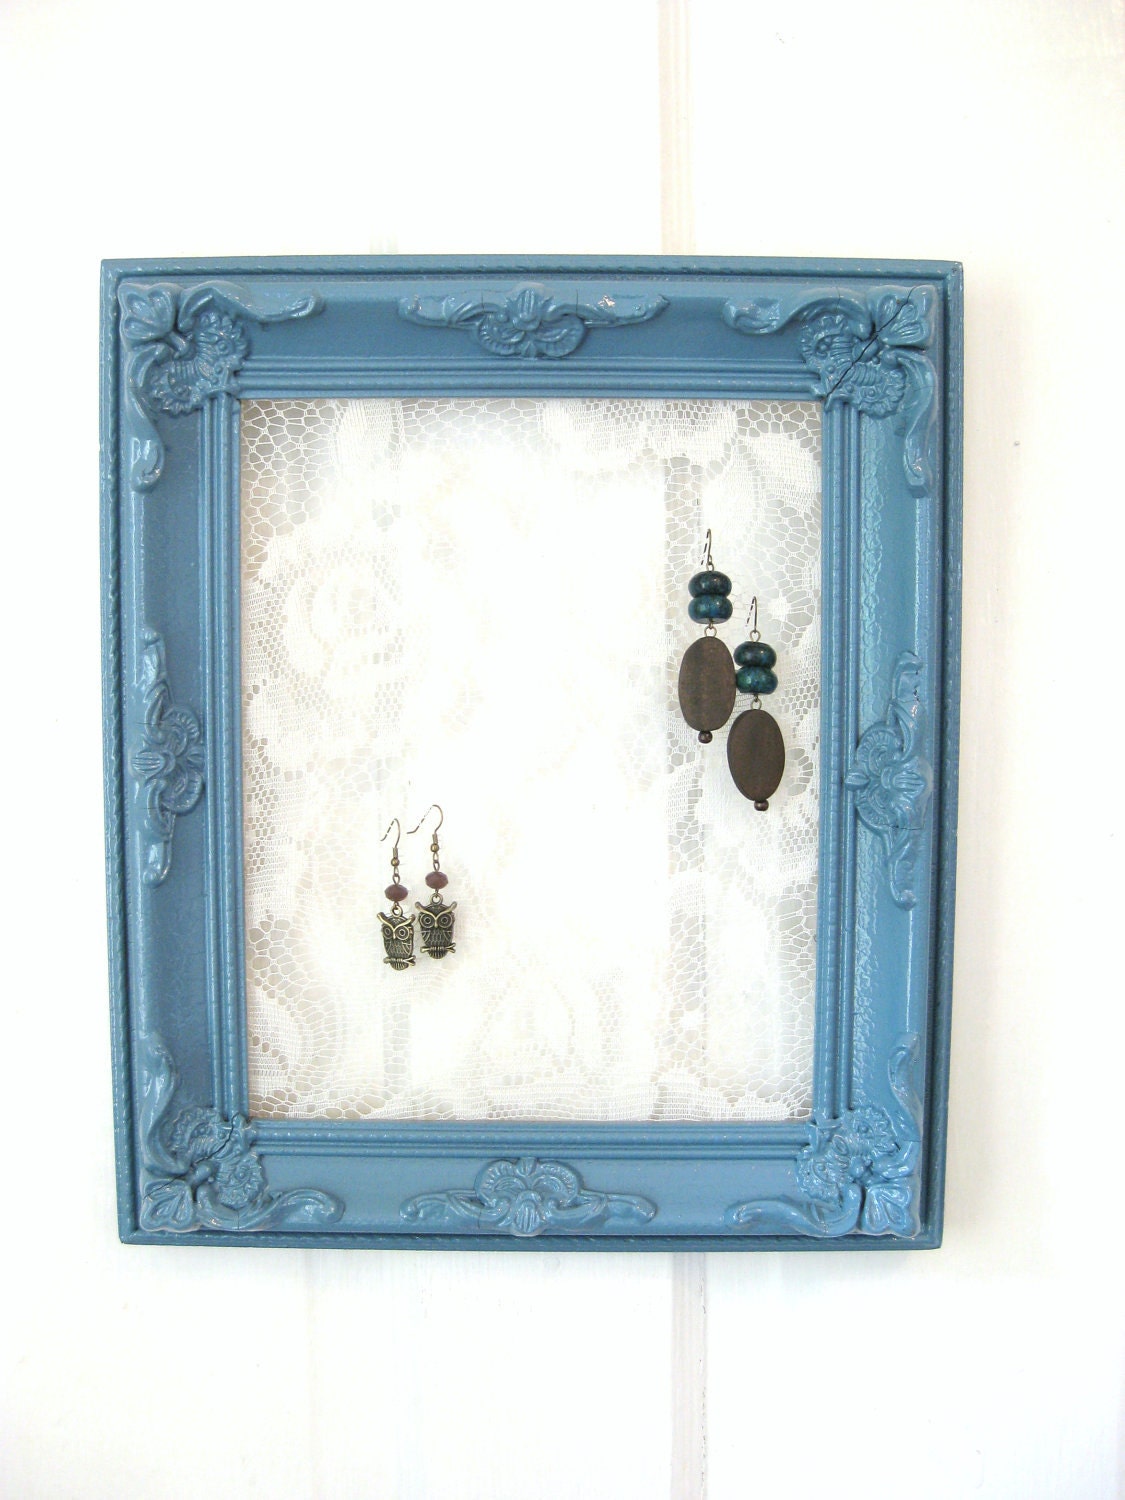 Upcycled Jewelry Frame, Painted Frame, Lace